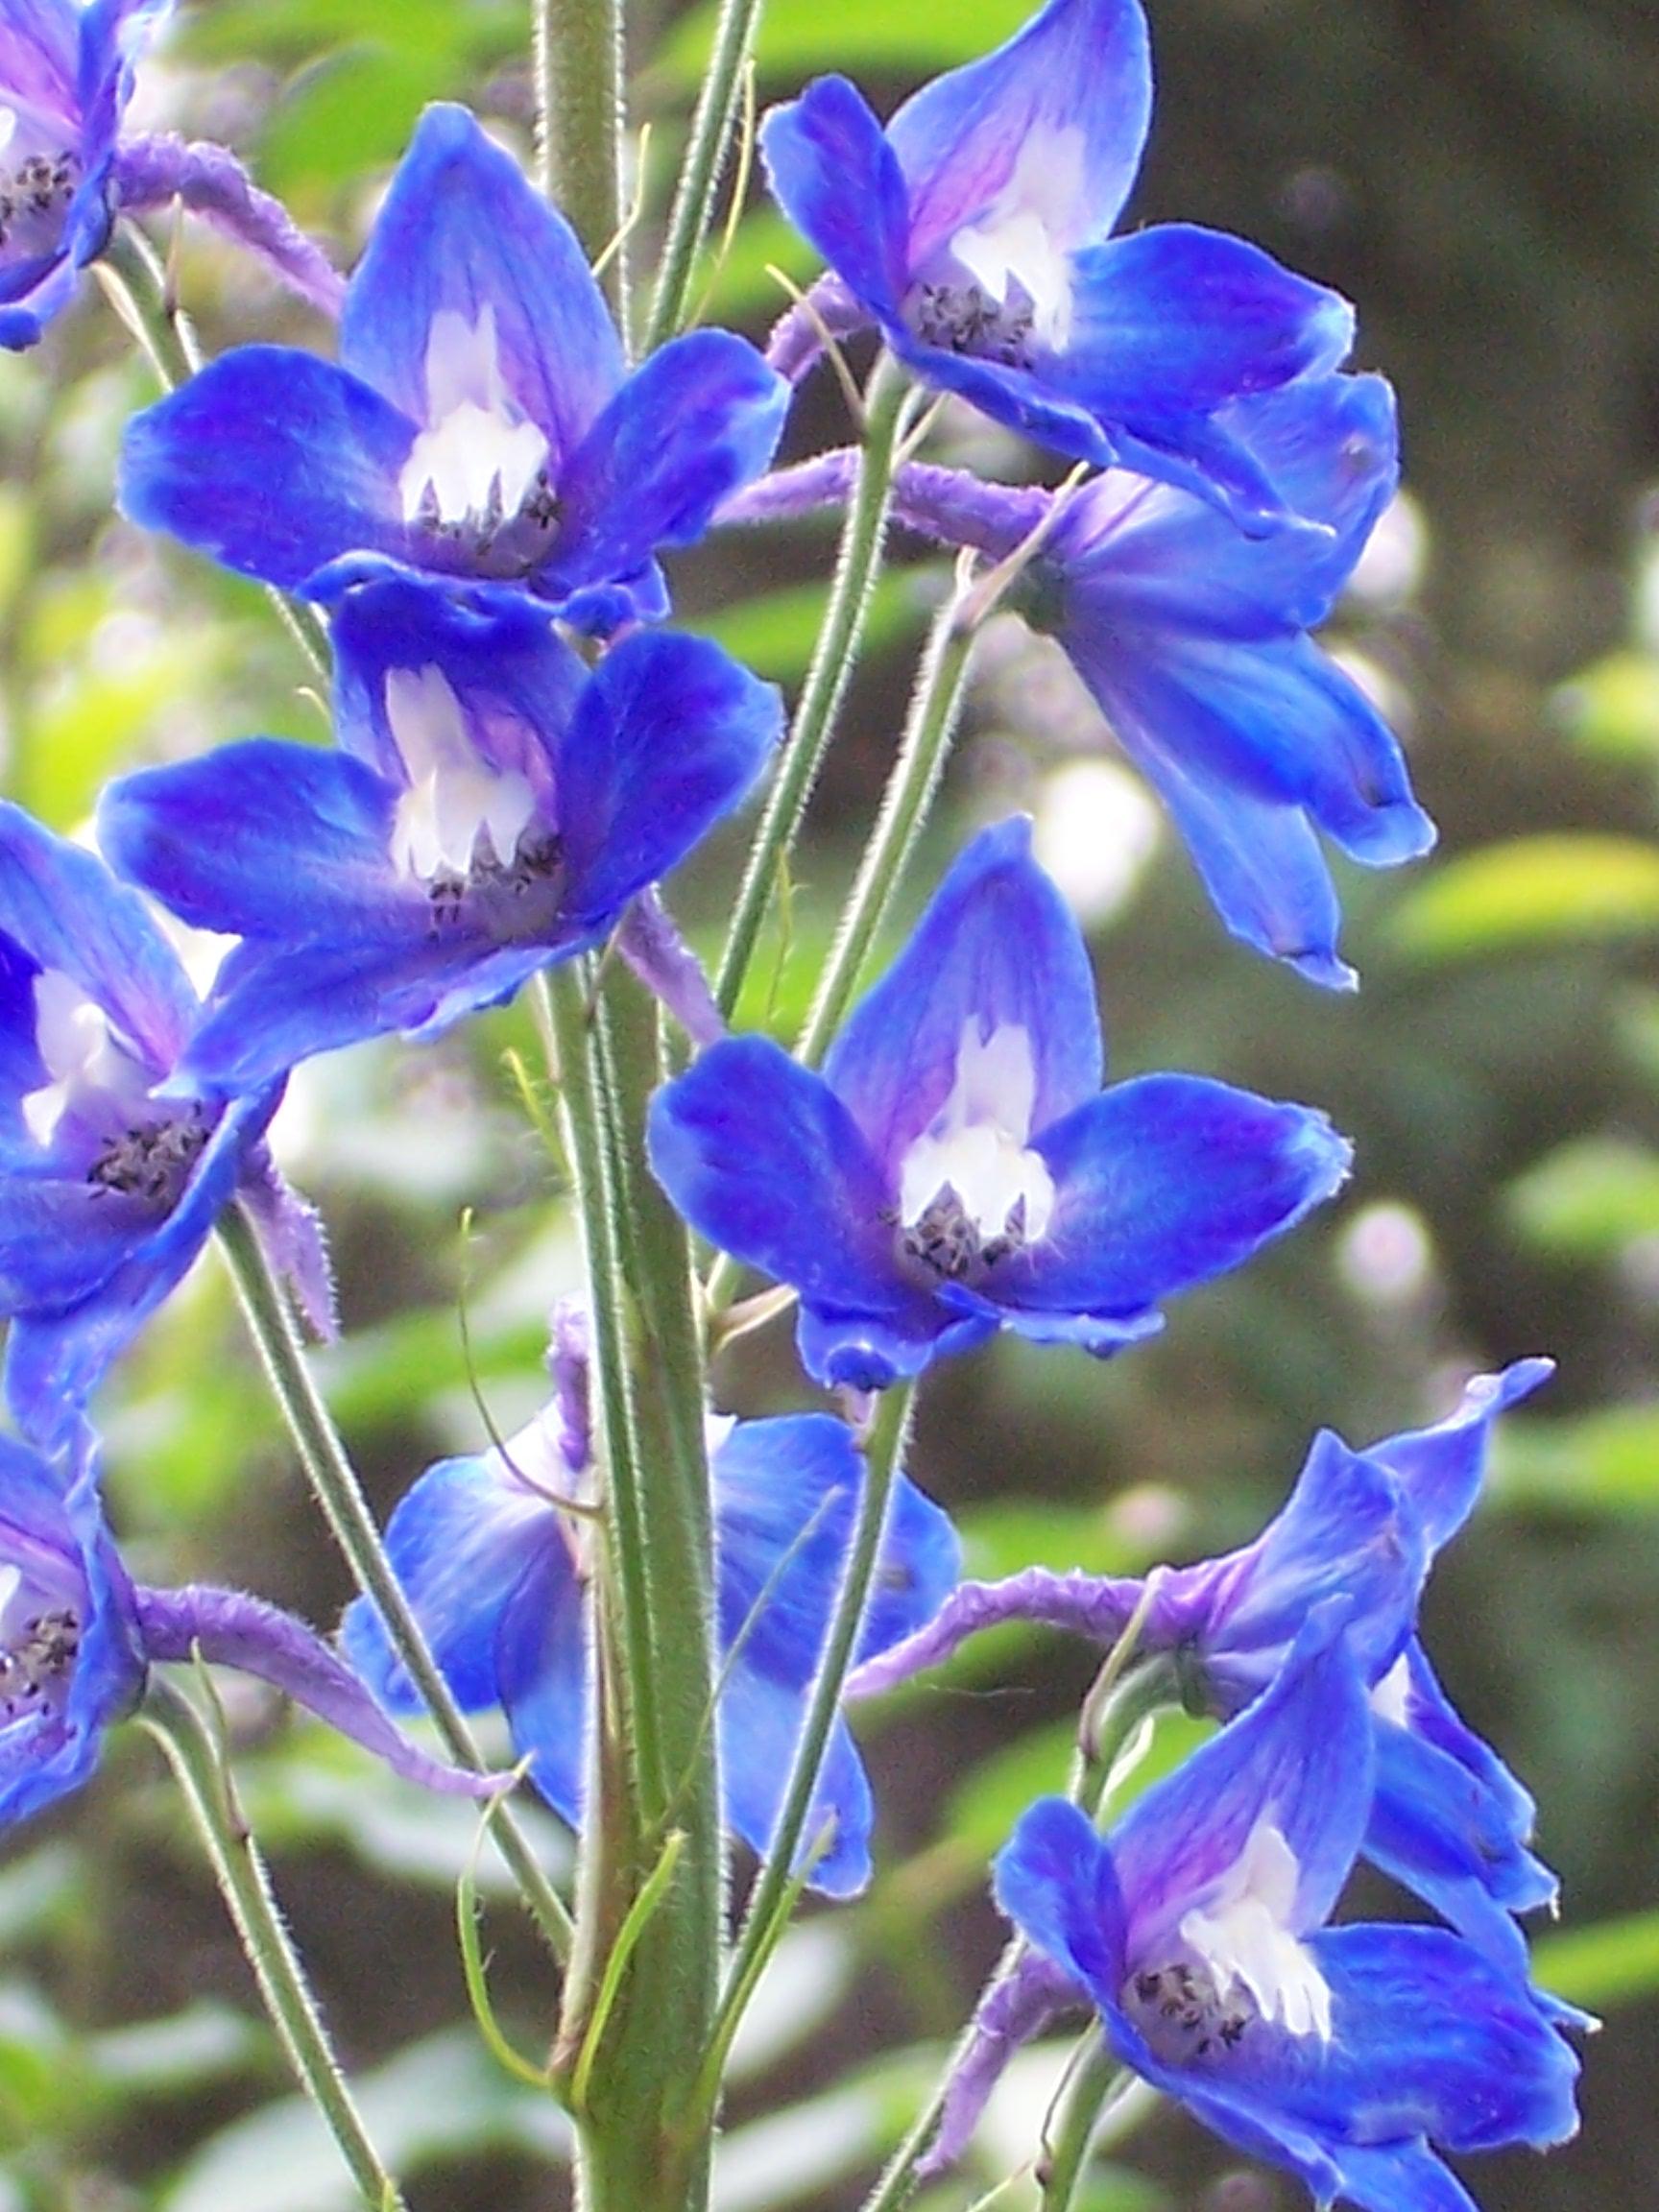  Delphinium   Flower of the Day